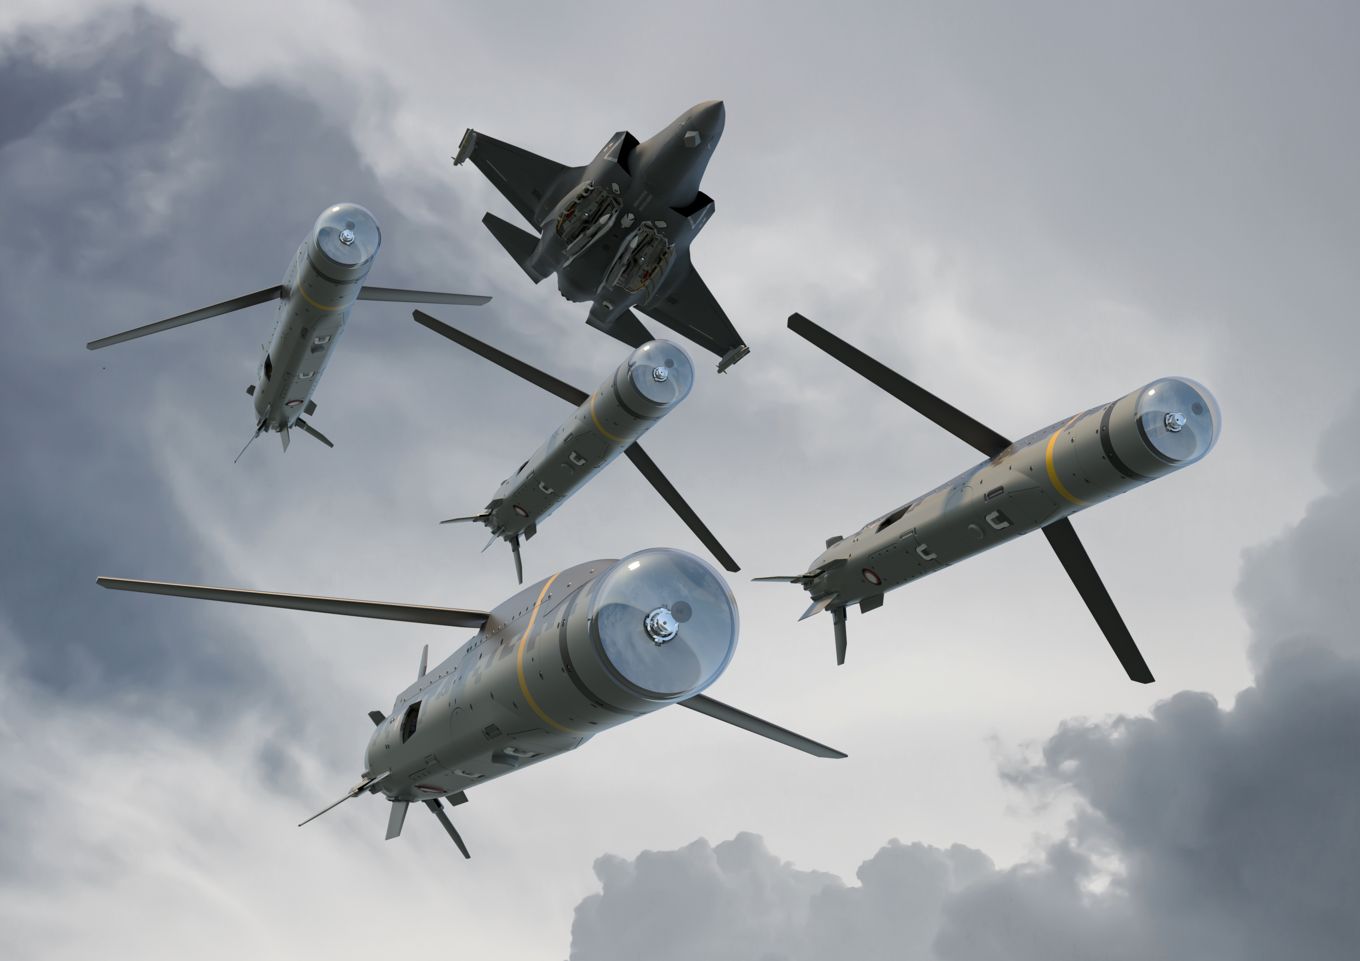 Image shows a computer generated image of the missiles and F-35B Lightning aircraft in the air.